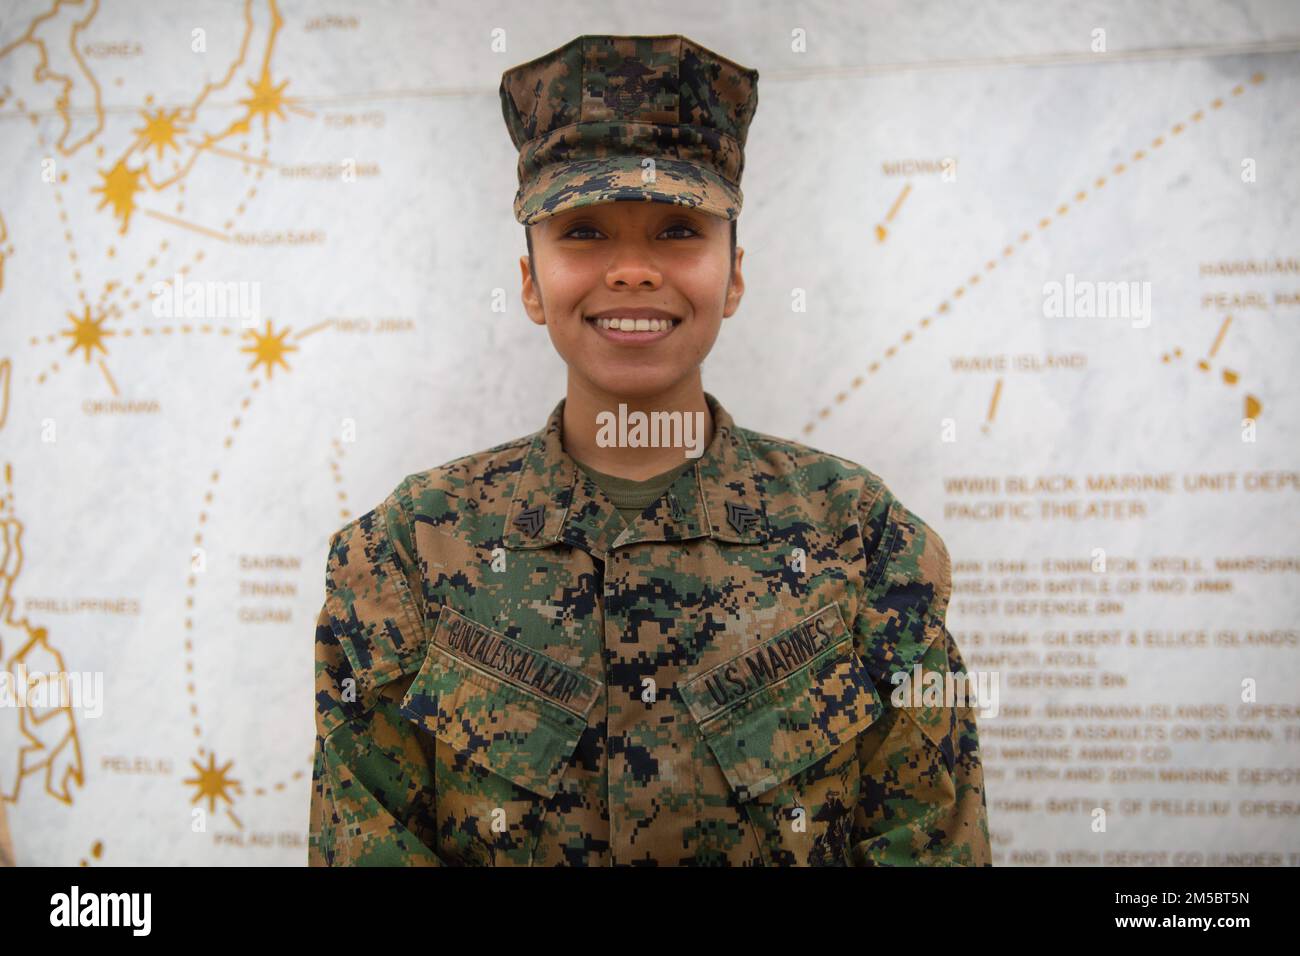 U.S. Marine Corps Sgt. Azucena GonzalesSalazar, supply fiscal chief for 2nd Intelligence Battalion, II MEF Information Group (MIG), poses for a photo, Camp Lejeune, North Carolina, Feb 28, 2022. Sgt. Azucena GonzalesSalazar was meritoriously promoted to the rank of sergeant by II MIG, having stood out amongst her peers and demonstrated exceptional performance of her duties. Stock Photo